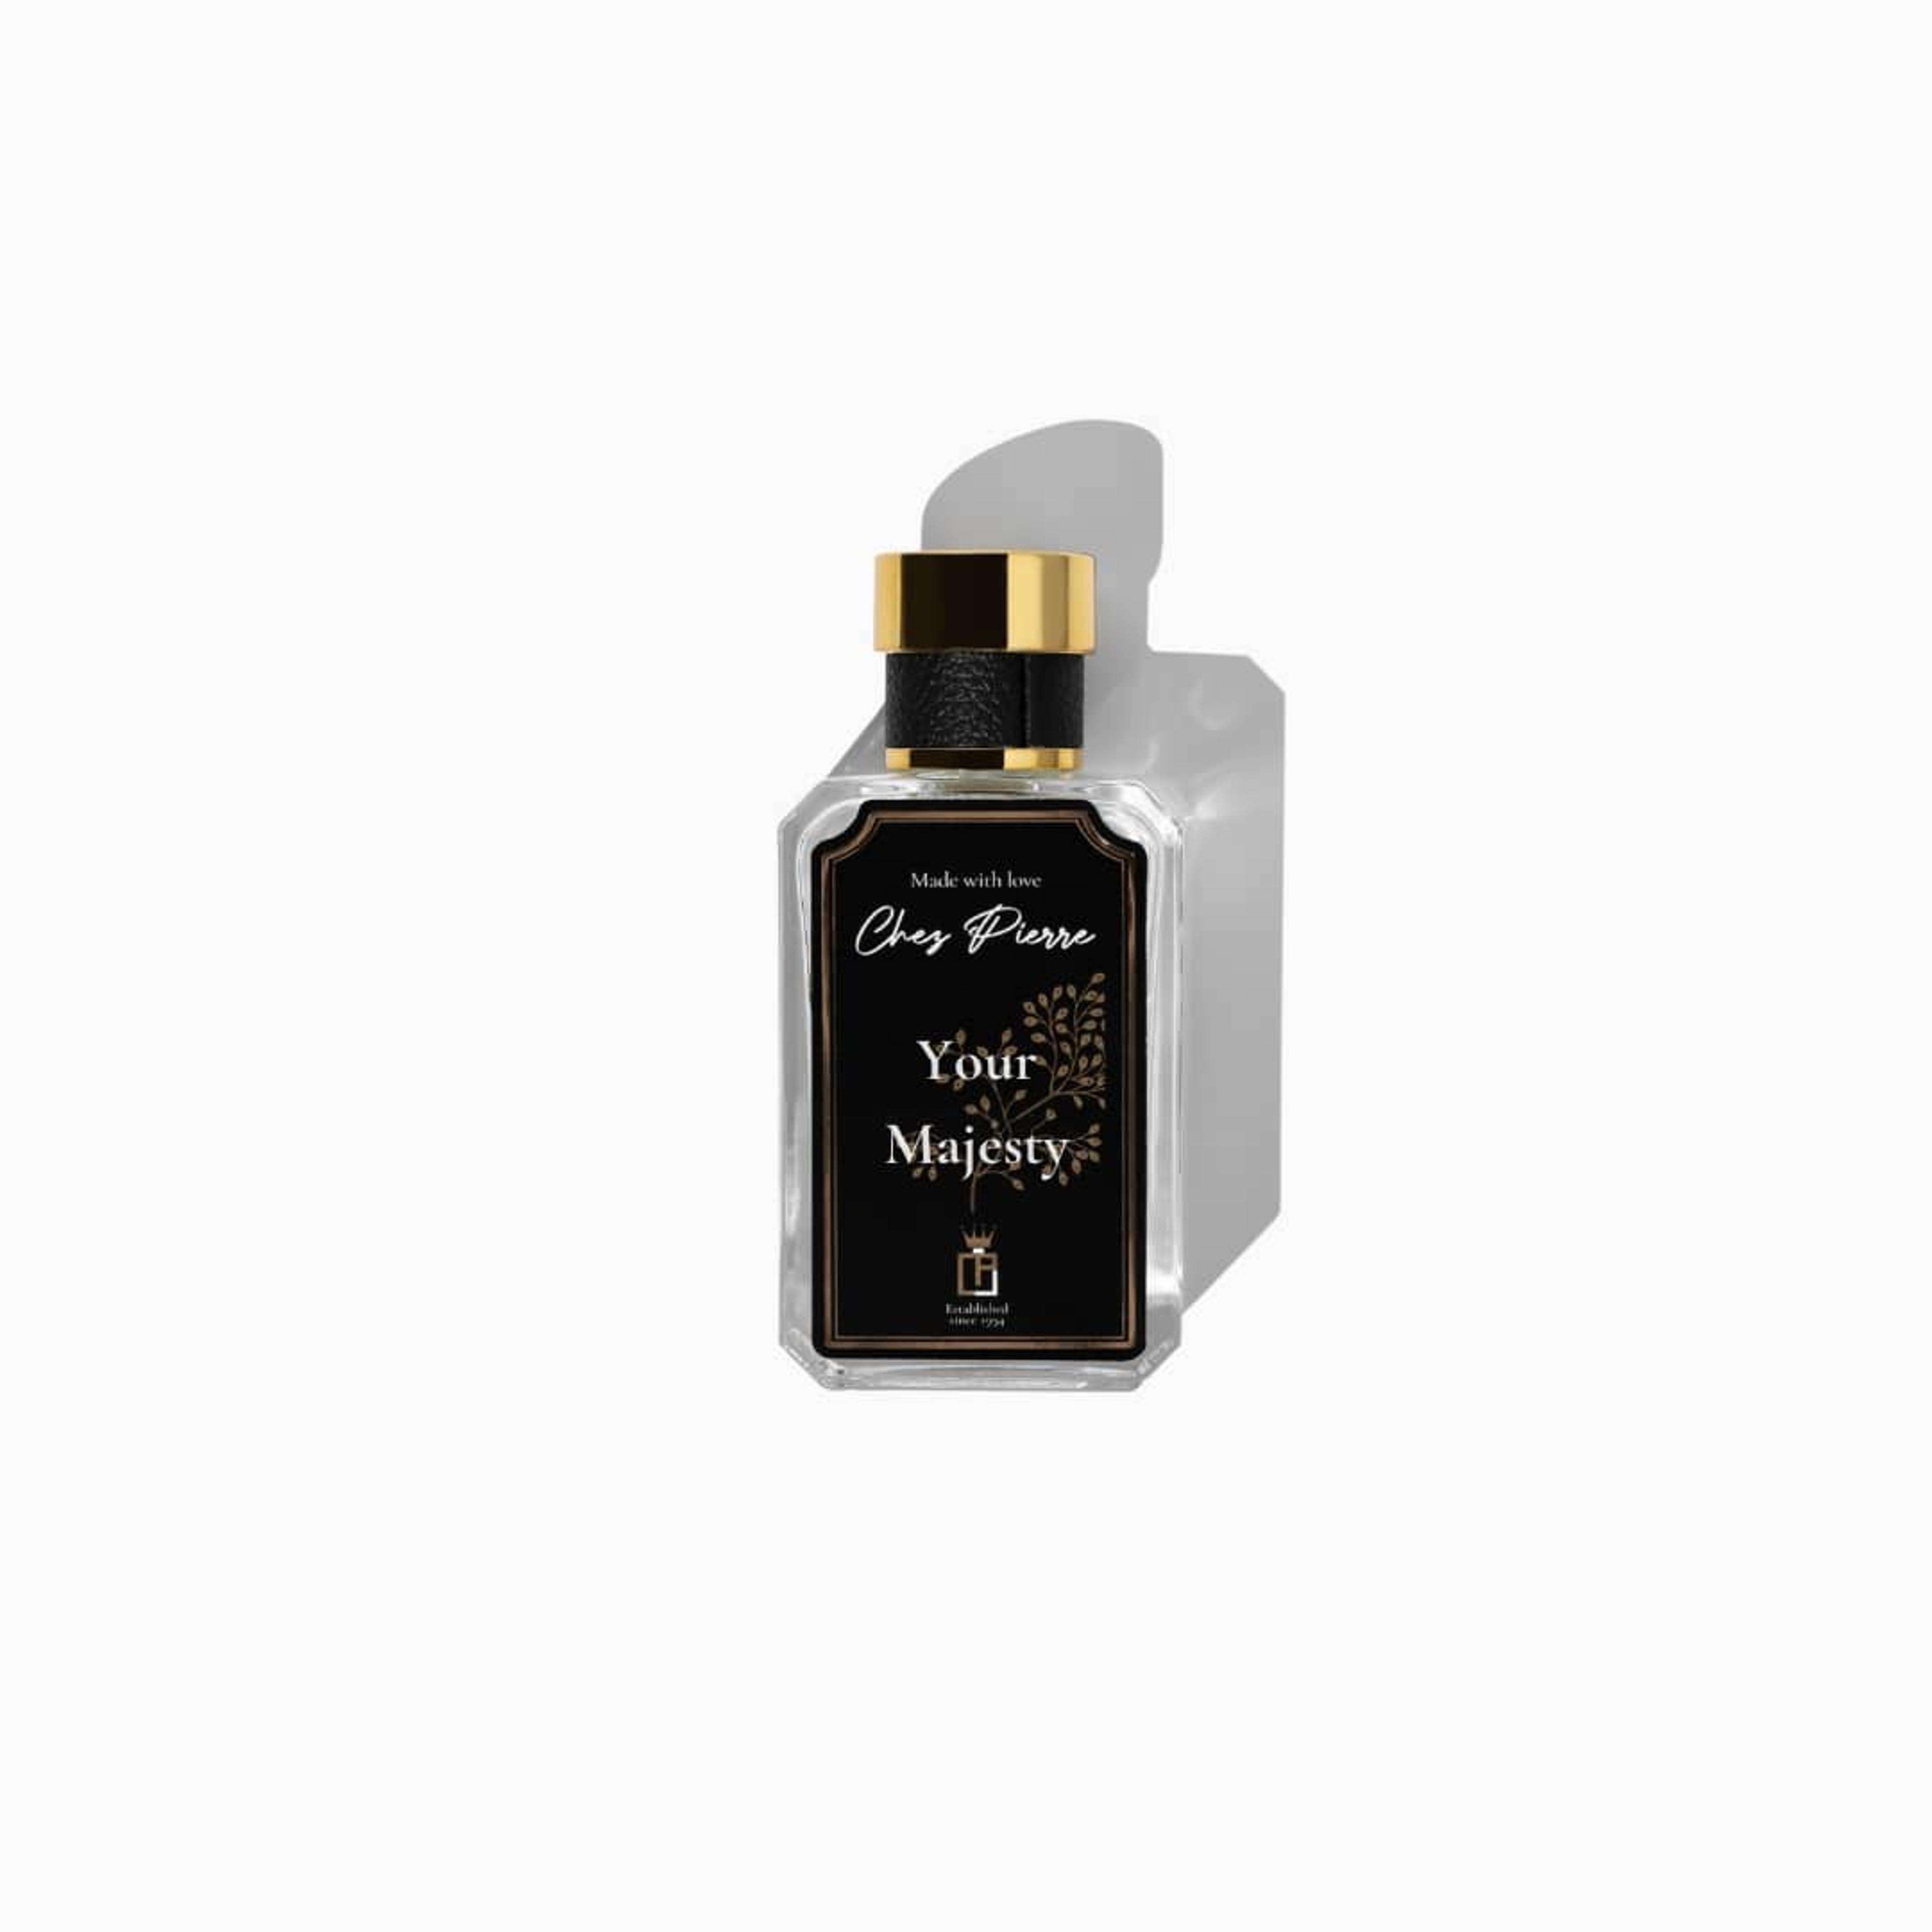 Chez Pierre's Your Majesty Perfume Inspired By Olympea